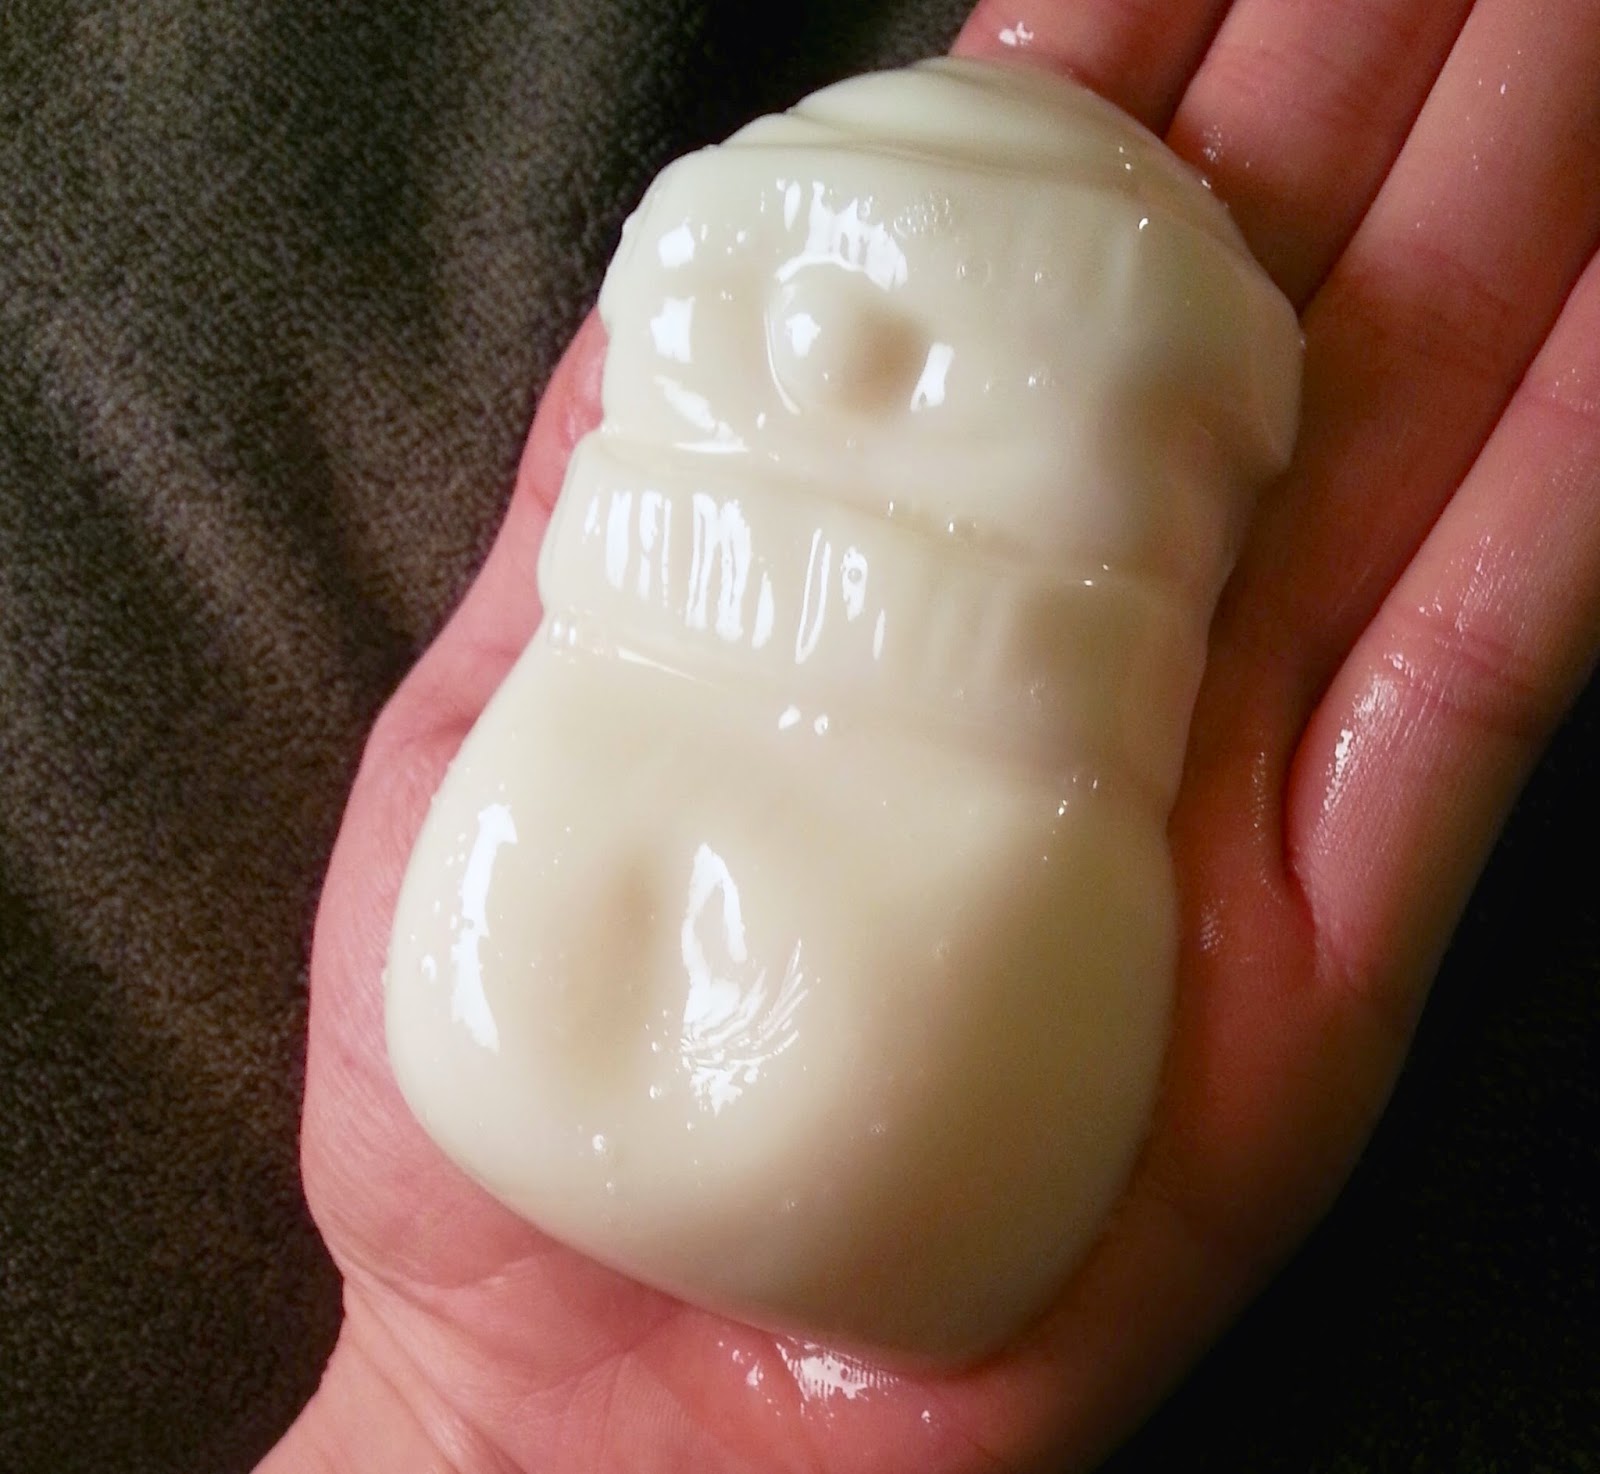 LUSH Snowman Shower Jelly Review